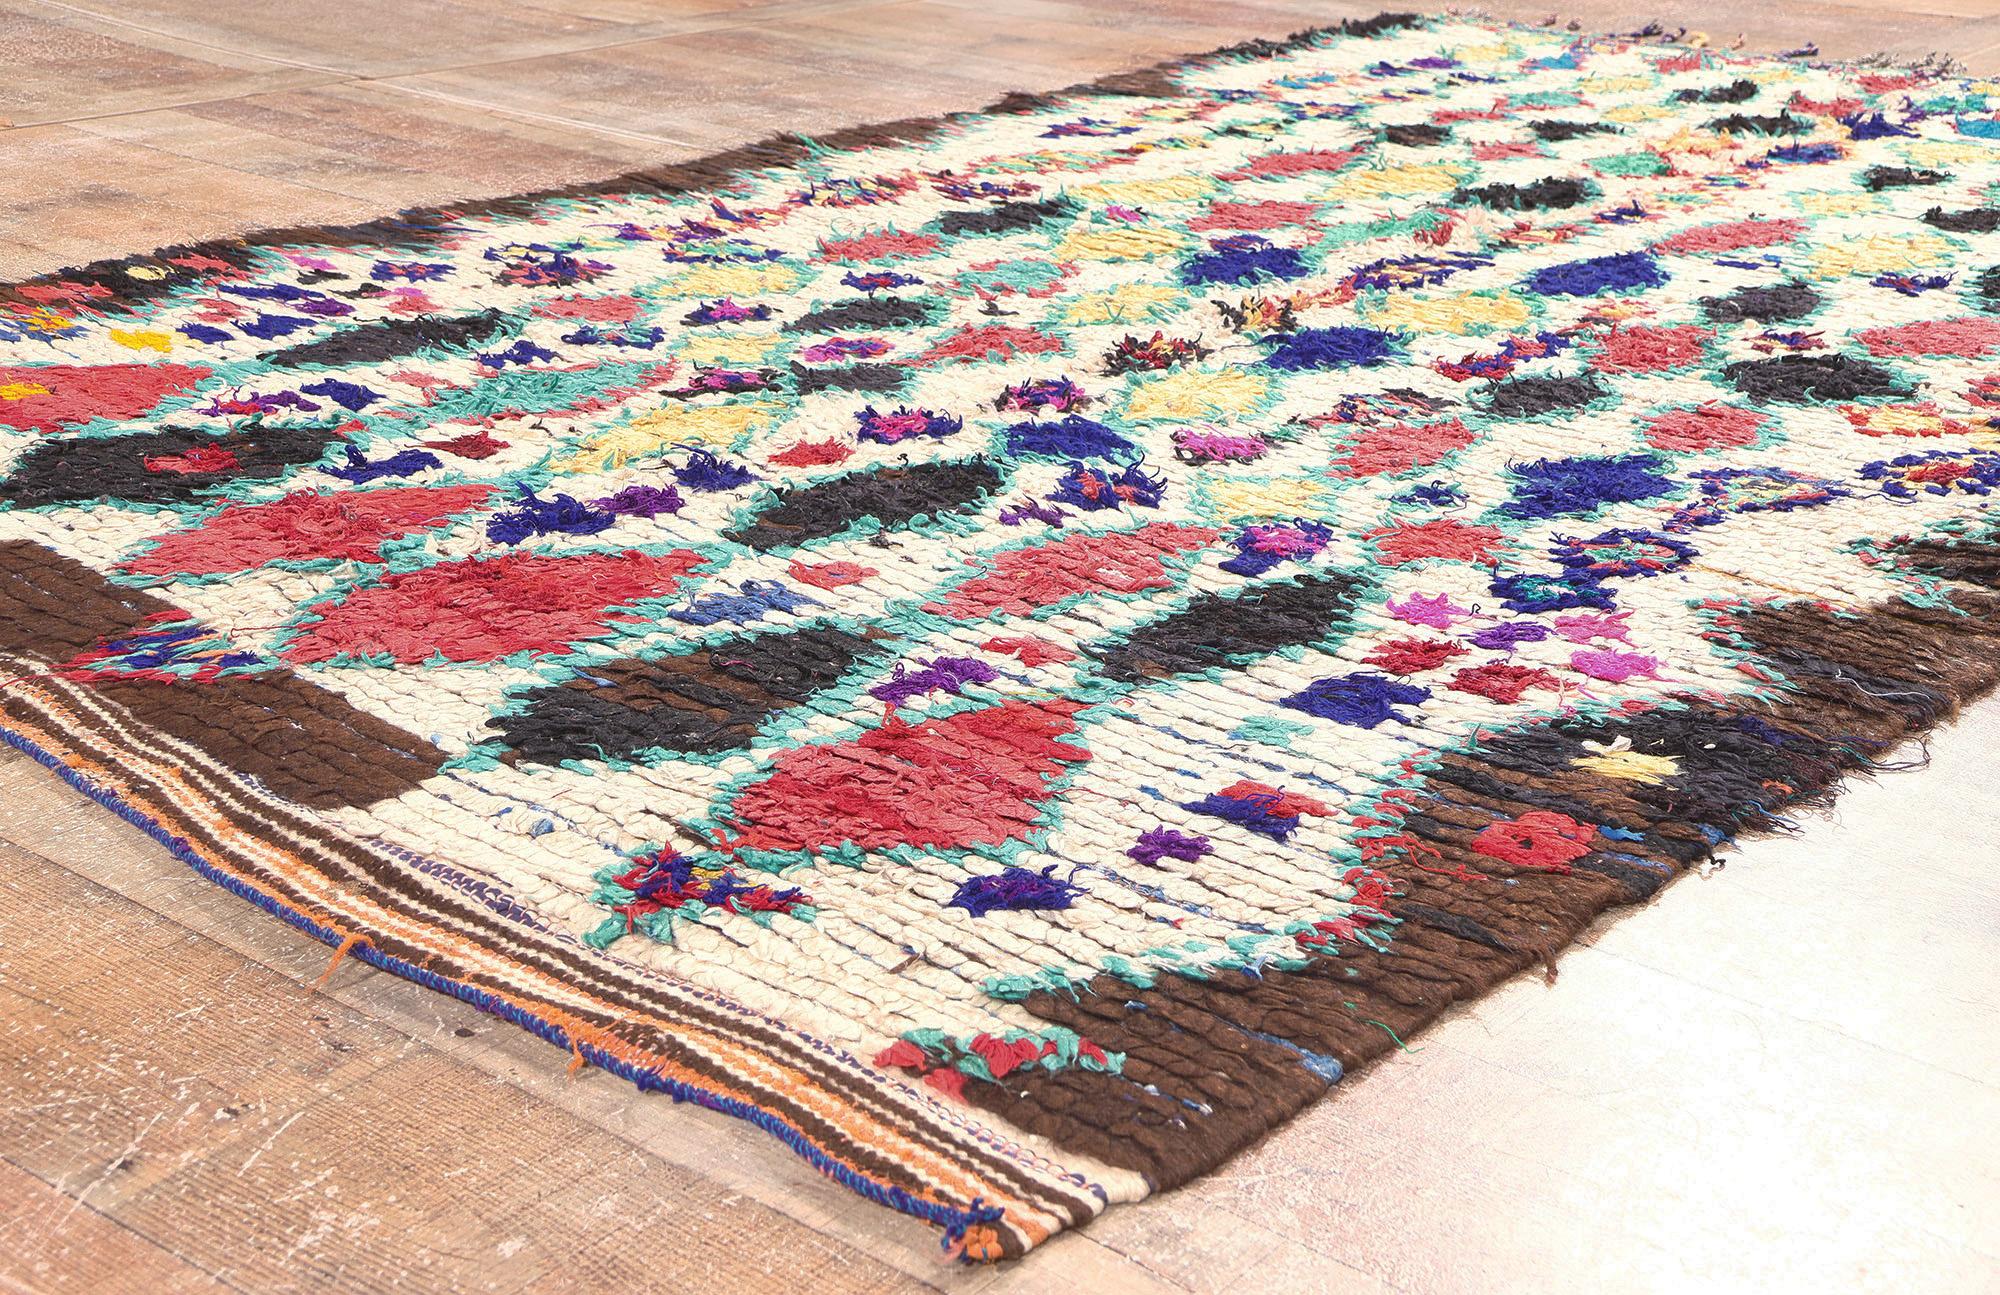 Cotton Vintage Boucherouite Moroccan Azilal Rag Rug by Berber Tribes of Morocco For Sale